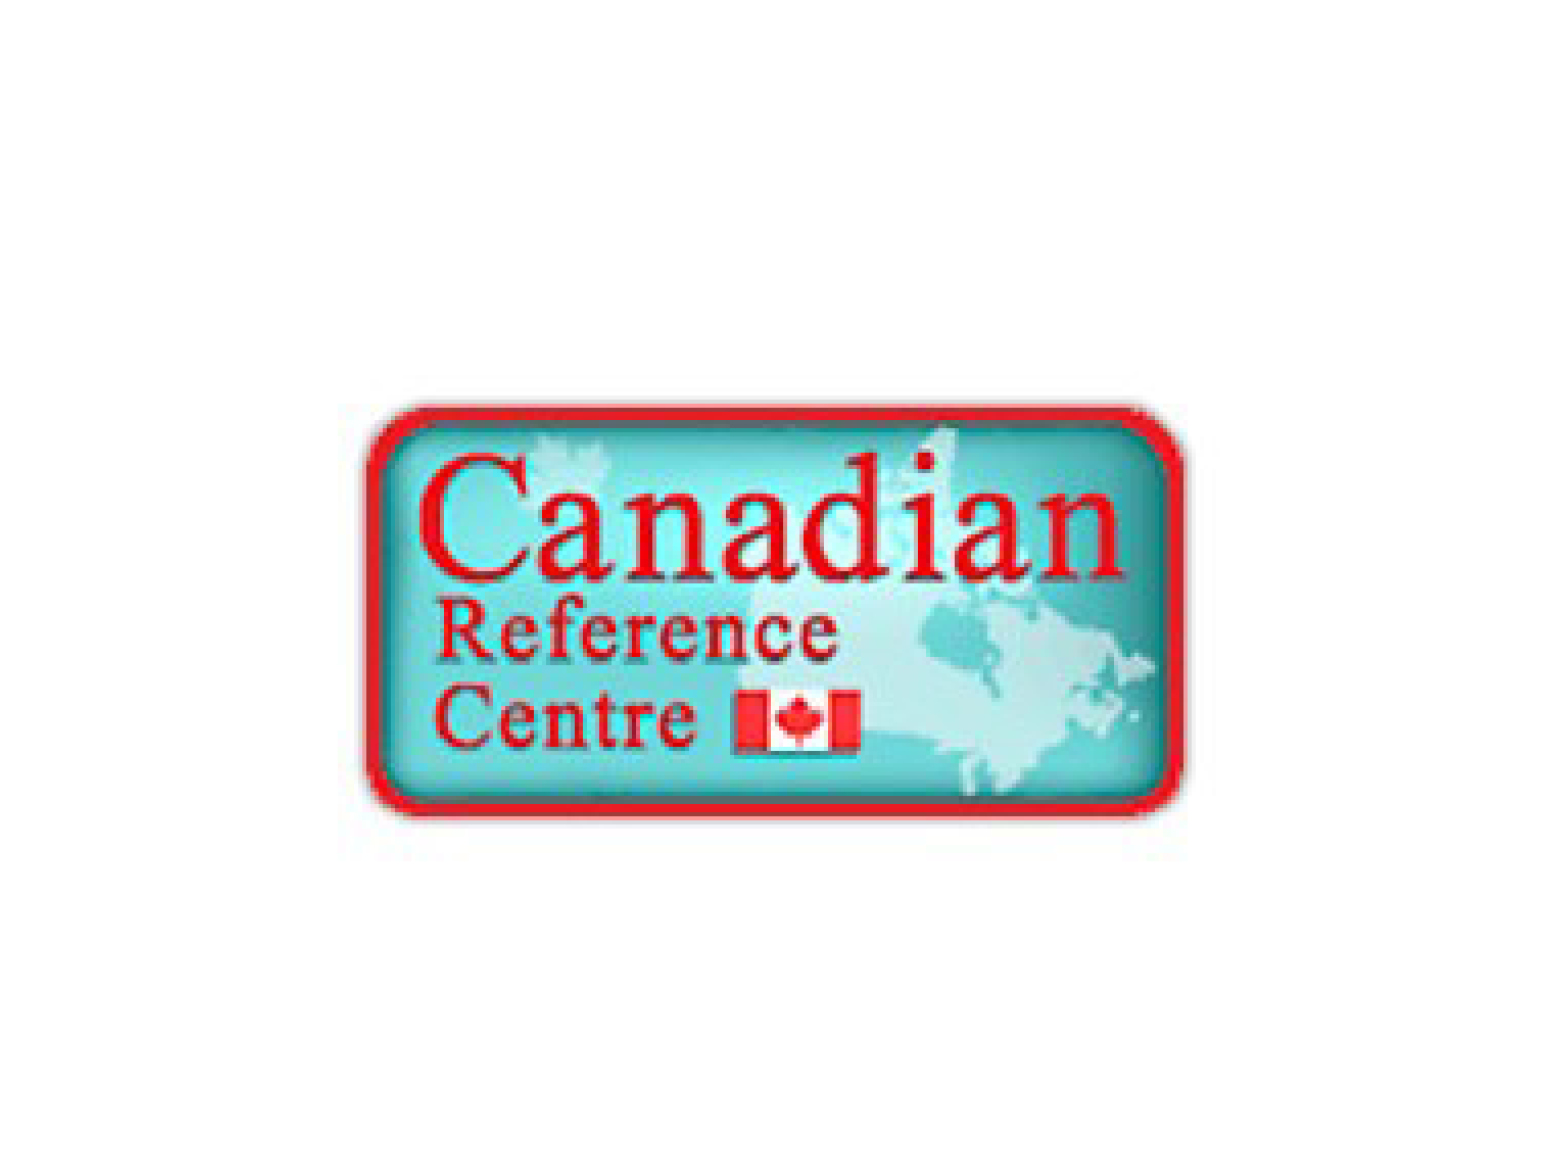 Canadian reference centre